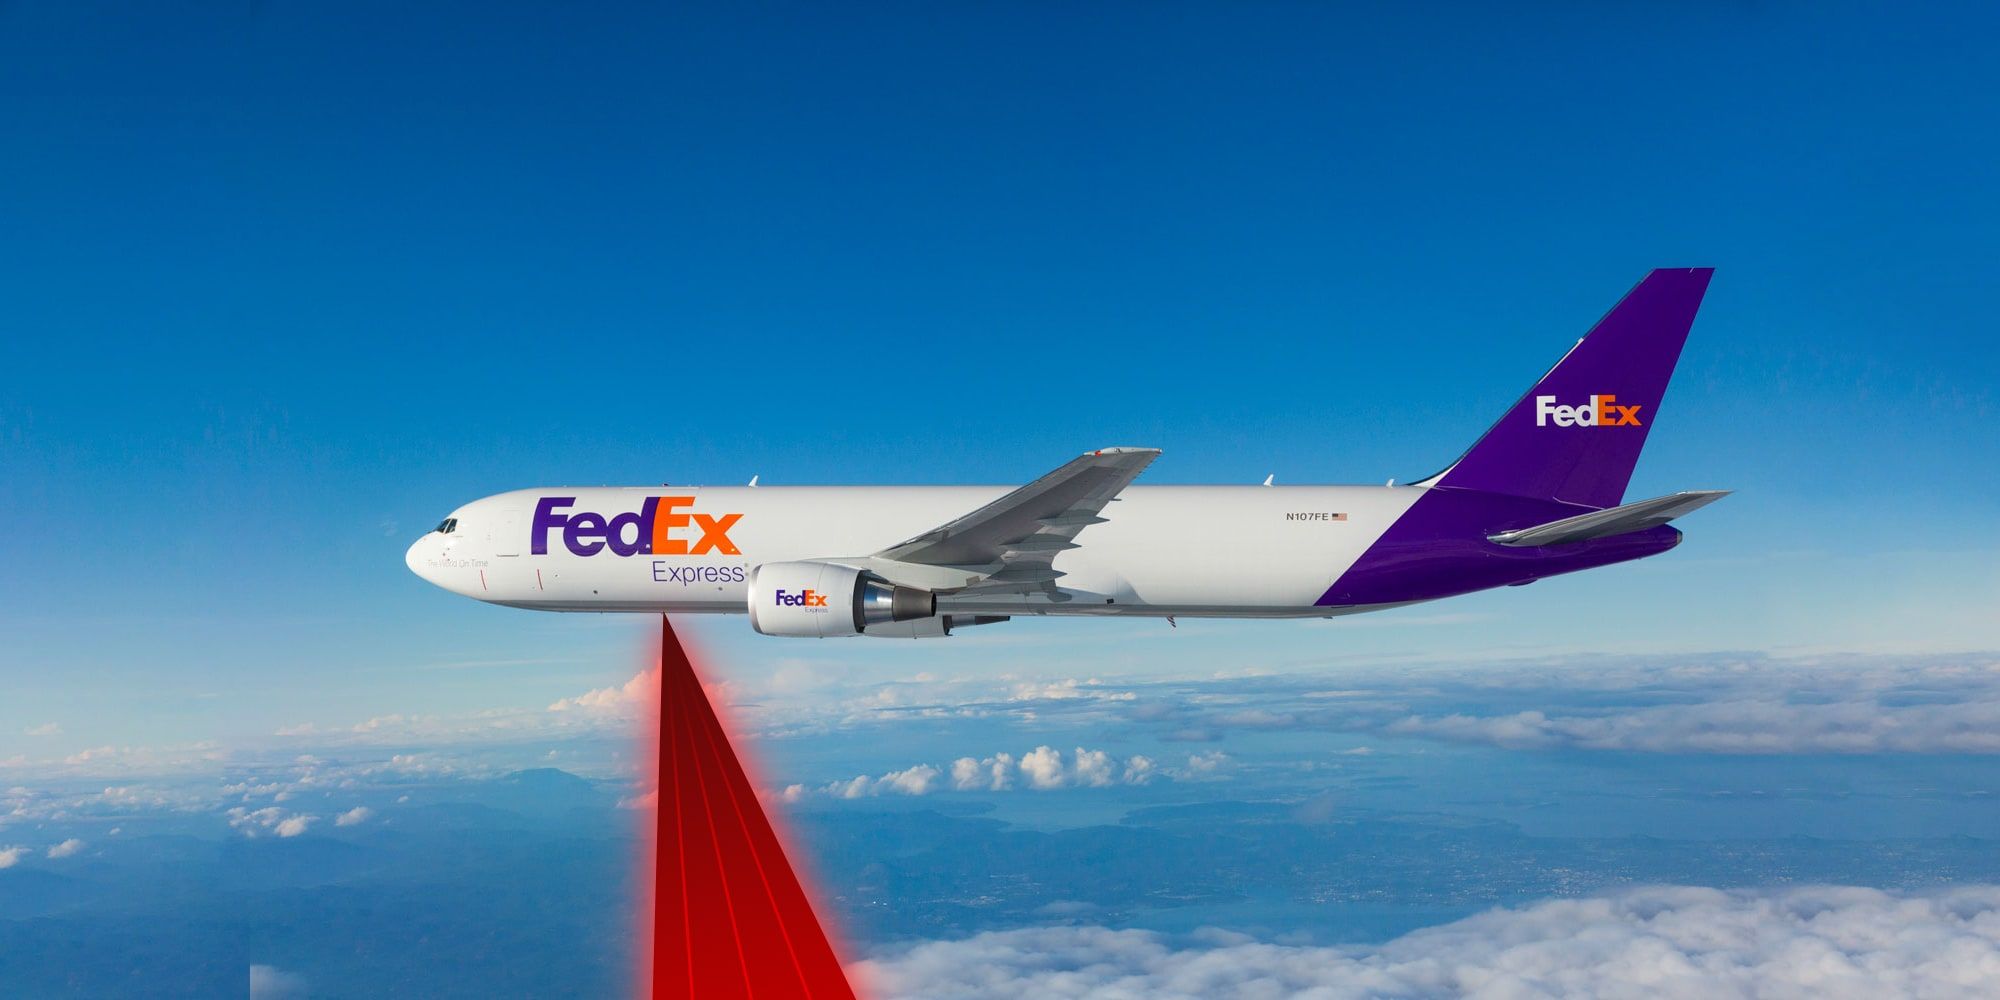 FedEx Wants To Install Missile-Killing Lasers On Its Planes